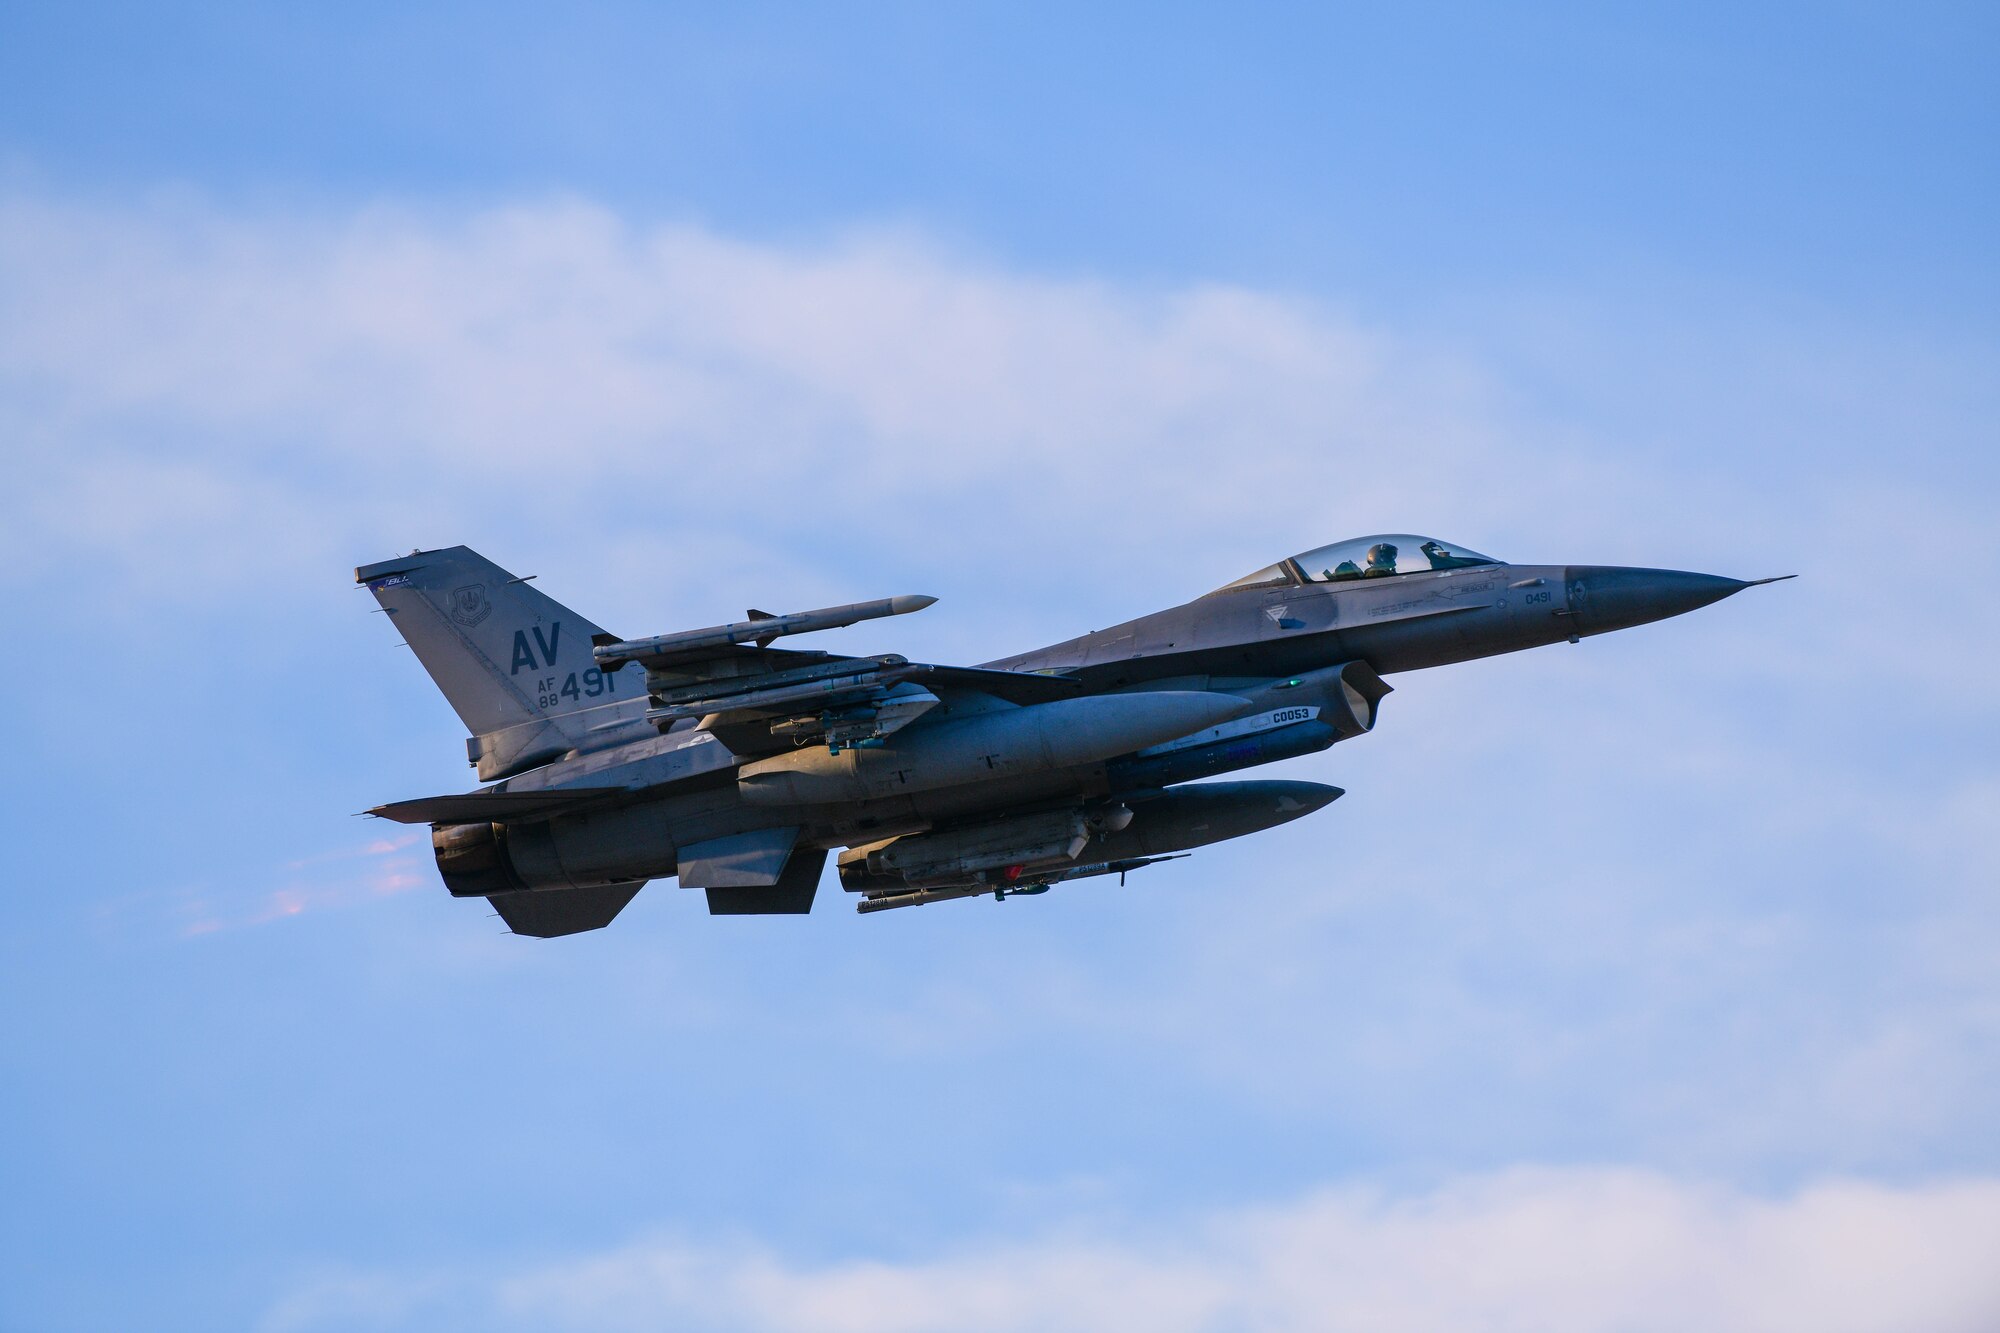 A U.S. Air Force F-16 Fighting Falcon assigned to the 510th Fighter Squadron, ascends during a training sortie at Aviano Air Base, Italy, Nov. 30, 2021. The 510th FS performs air and space control and force application roles of counter-air, strategic attack, and counter-land including interdiction and close-air support with 21 F-16CMs employing munitions in support of the joint, NATO, and combined operations. (U.S. Air Force photo by Senior Airman Brooke Moeder)